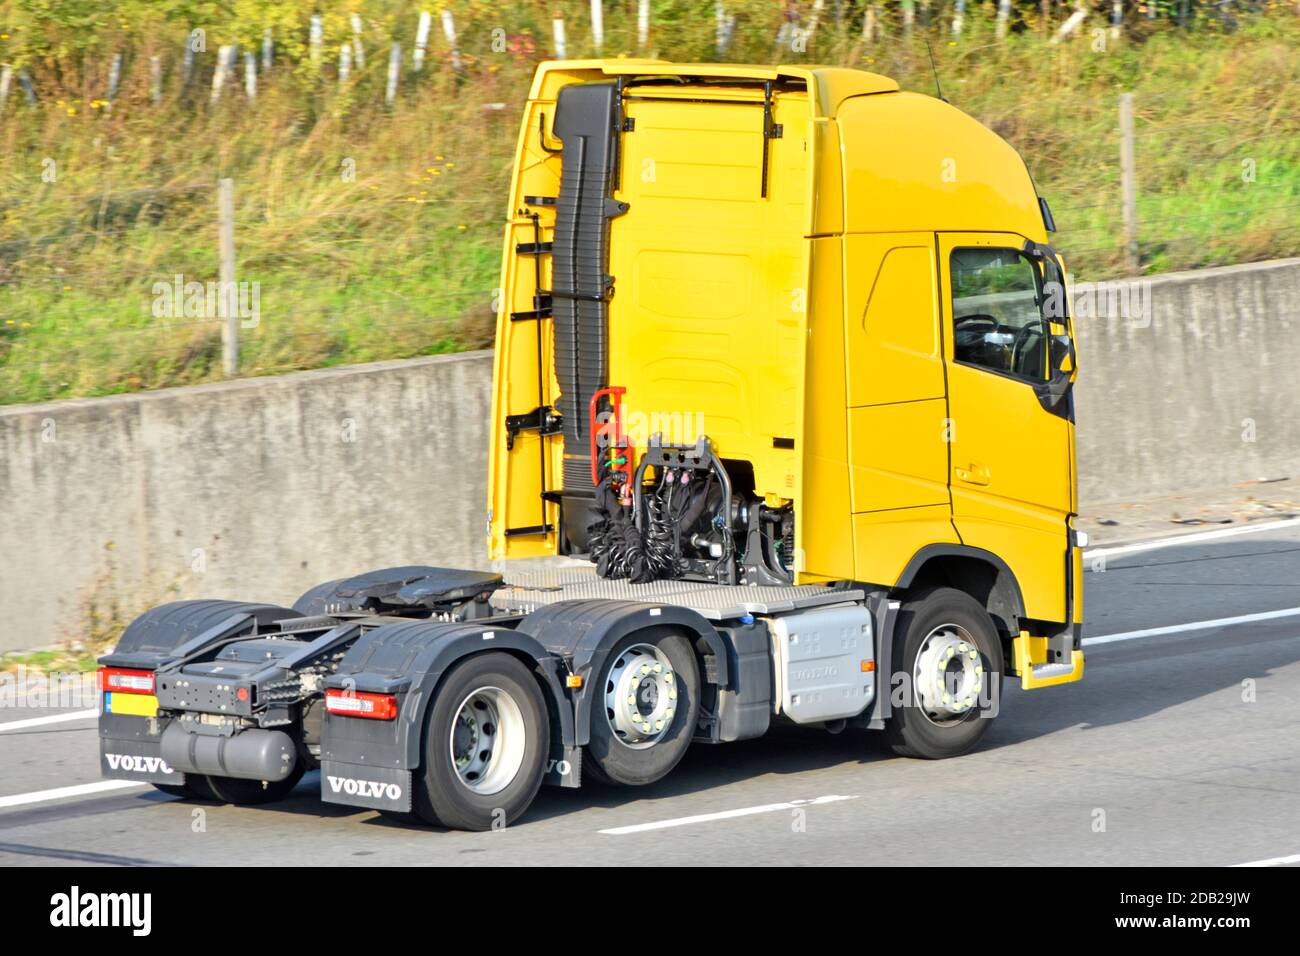 Back & side view cab of yellow clean Volvo solo semi truck tractor unit prime mover twin rear axle lorry with one axle raised & exhaust on UK motorway Stock Photo